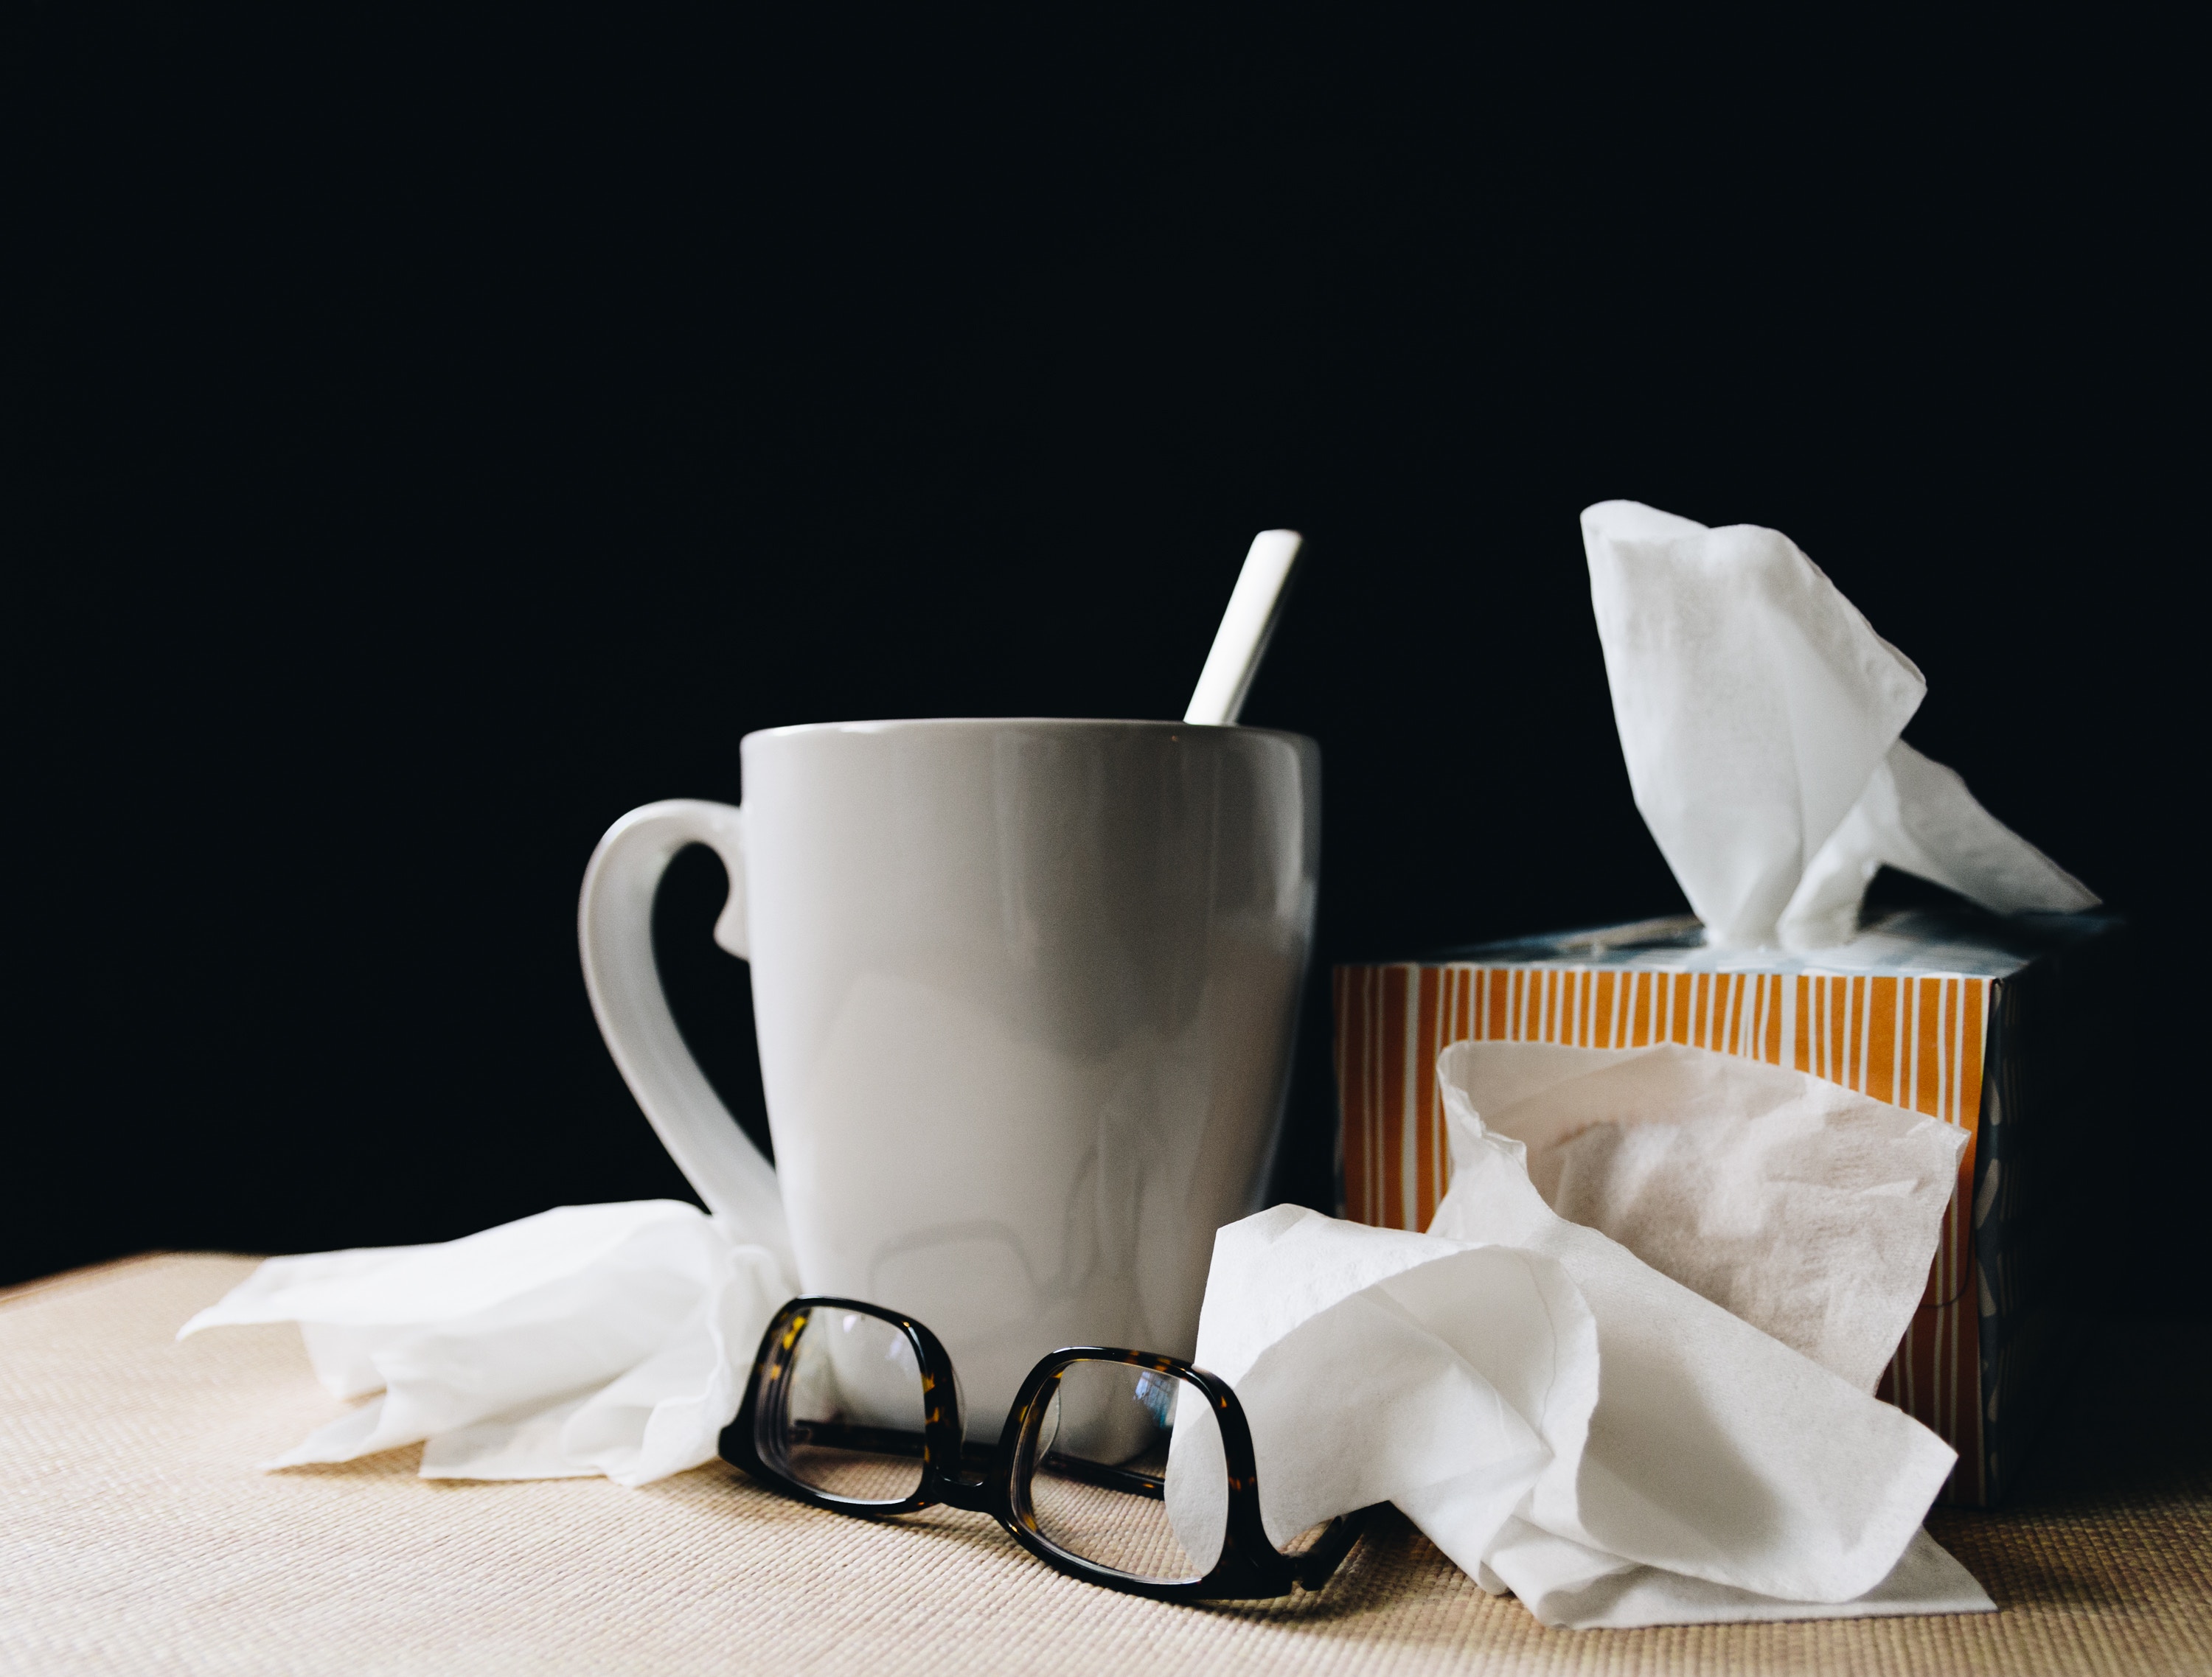 How to disinfect your house of the flu bug.